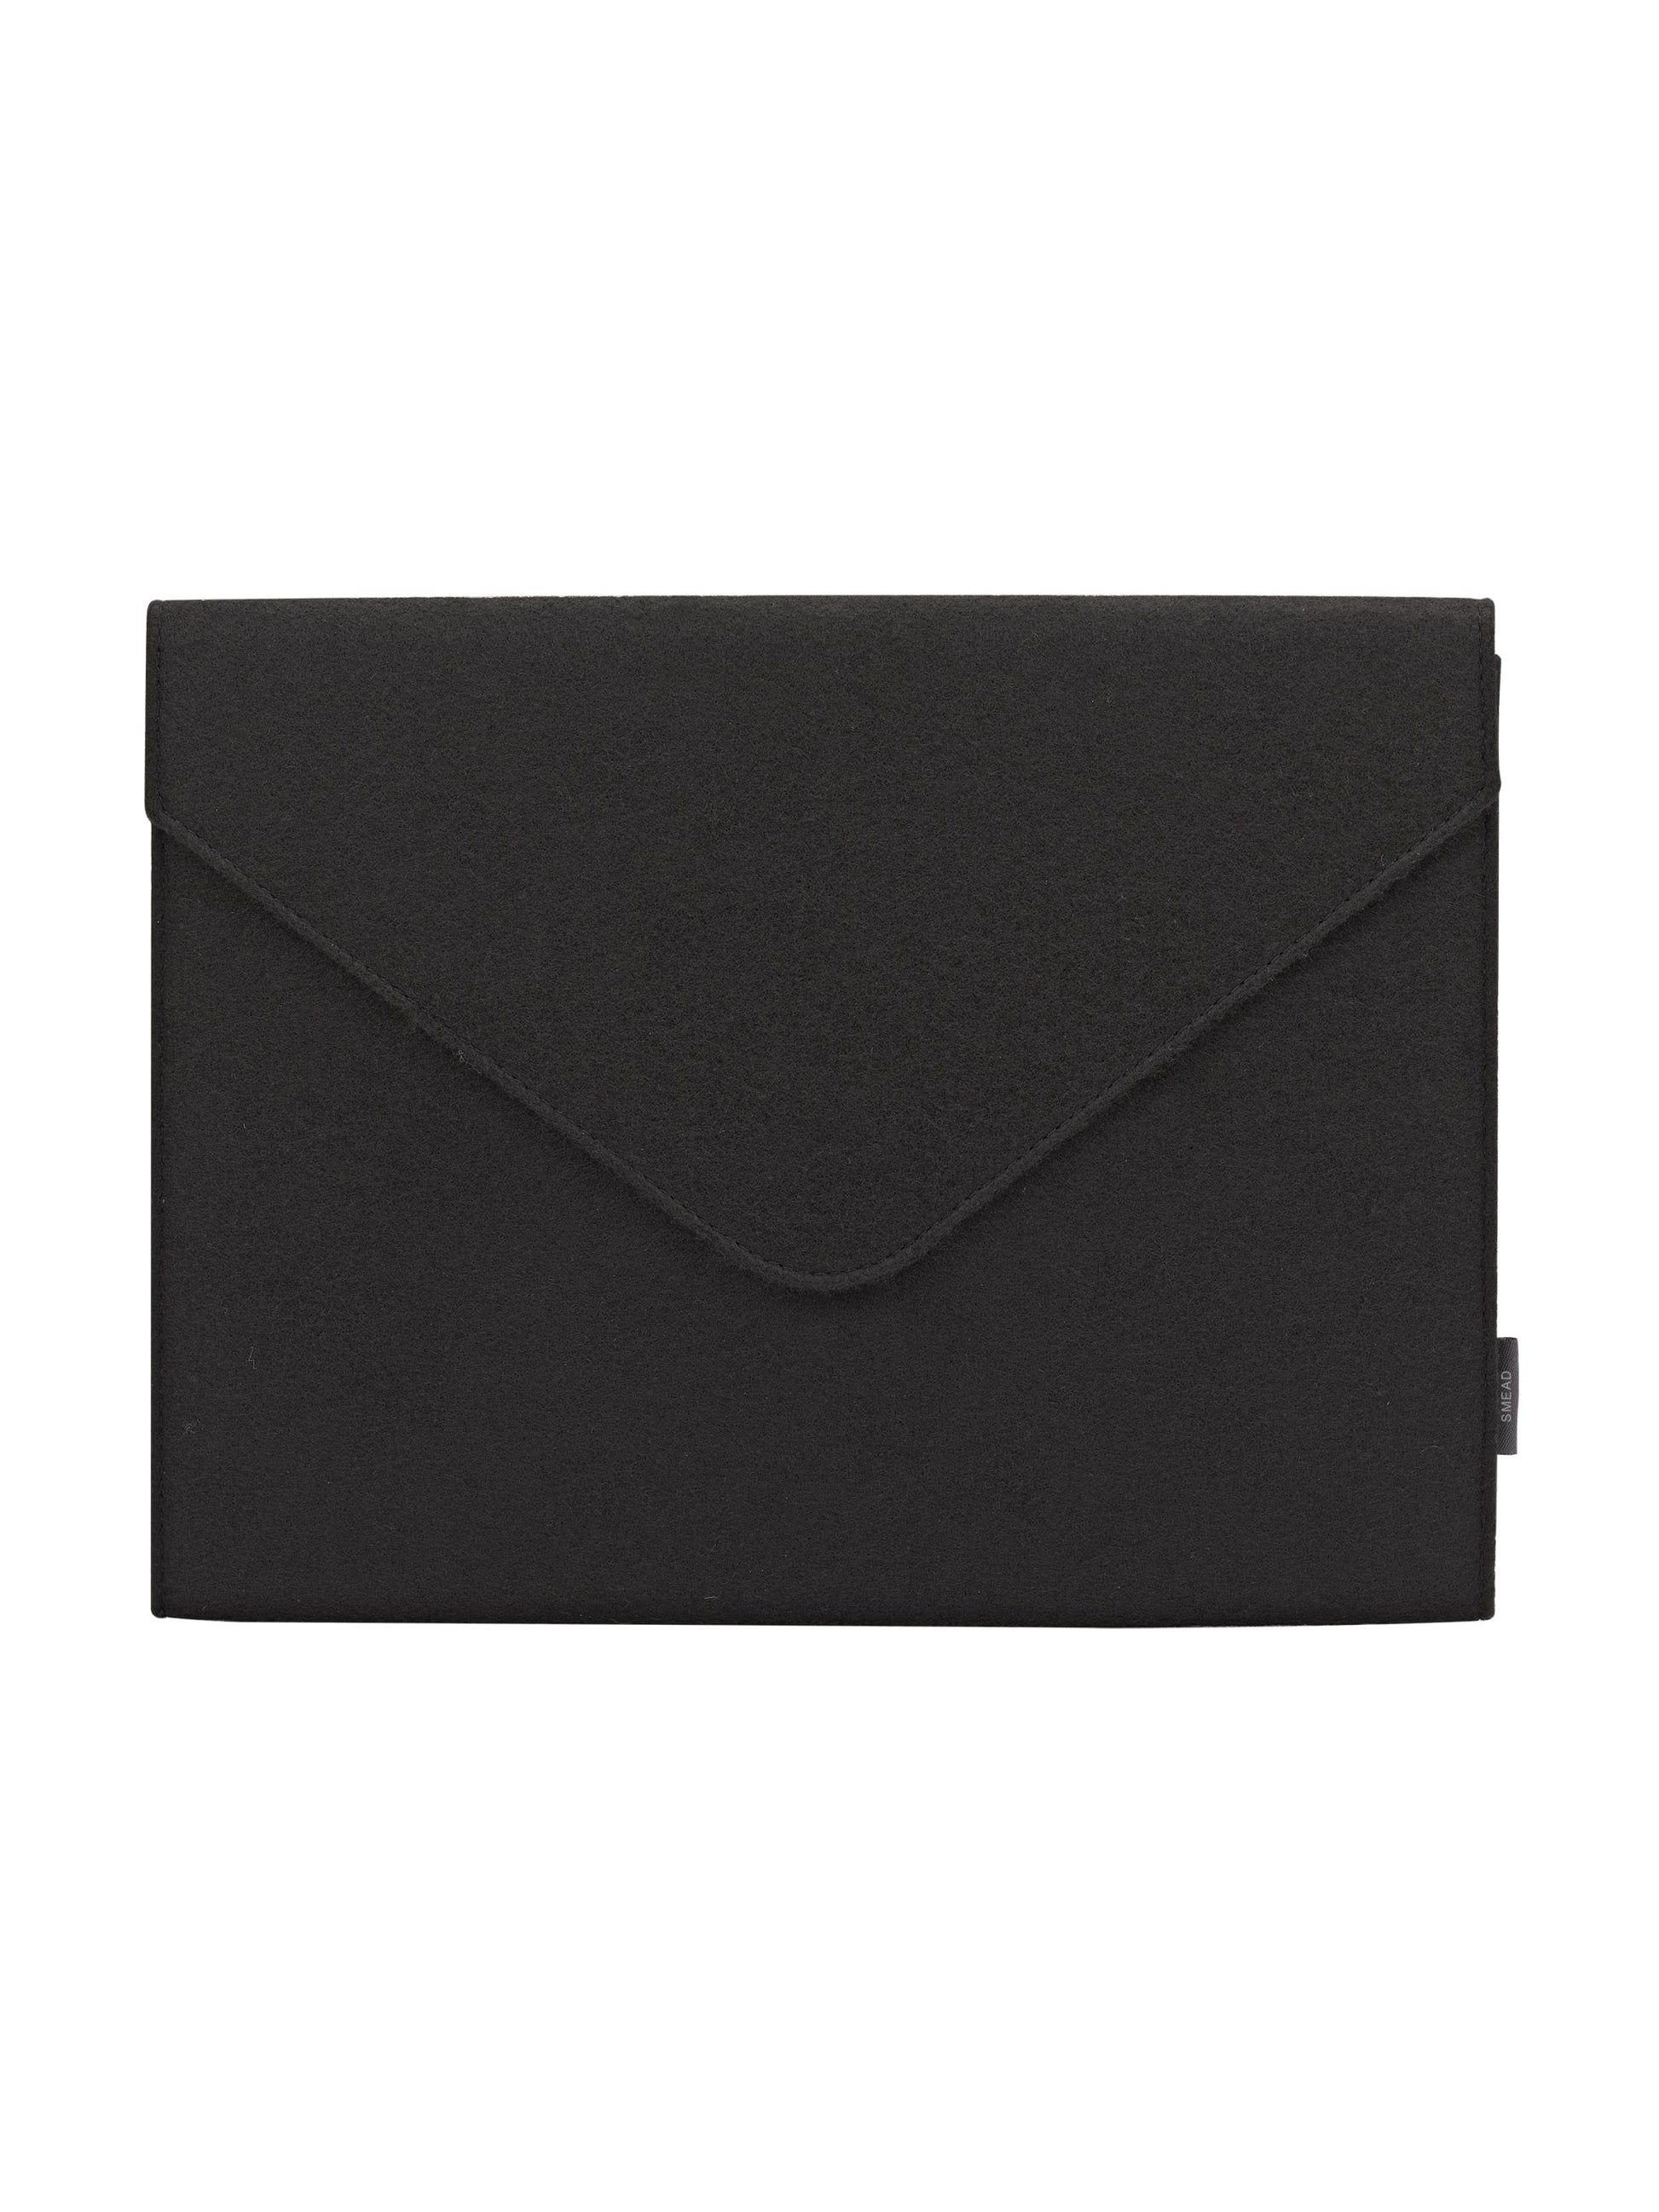 Soft Touch Cloth Expanding Files, 2-Inch Expansion, Black Color, Letter Size, Set of 1, 086486709200